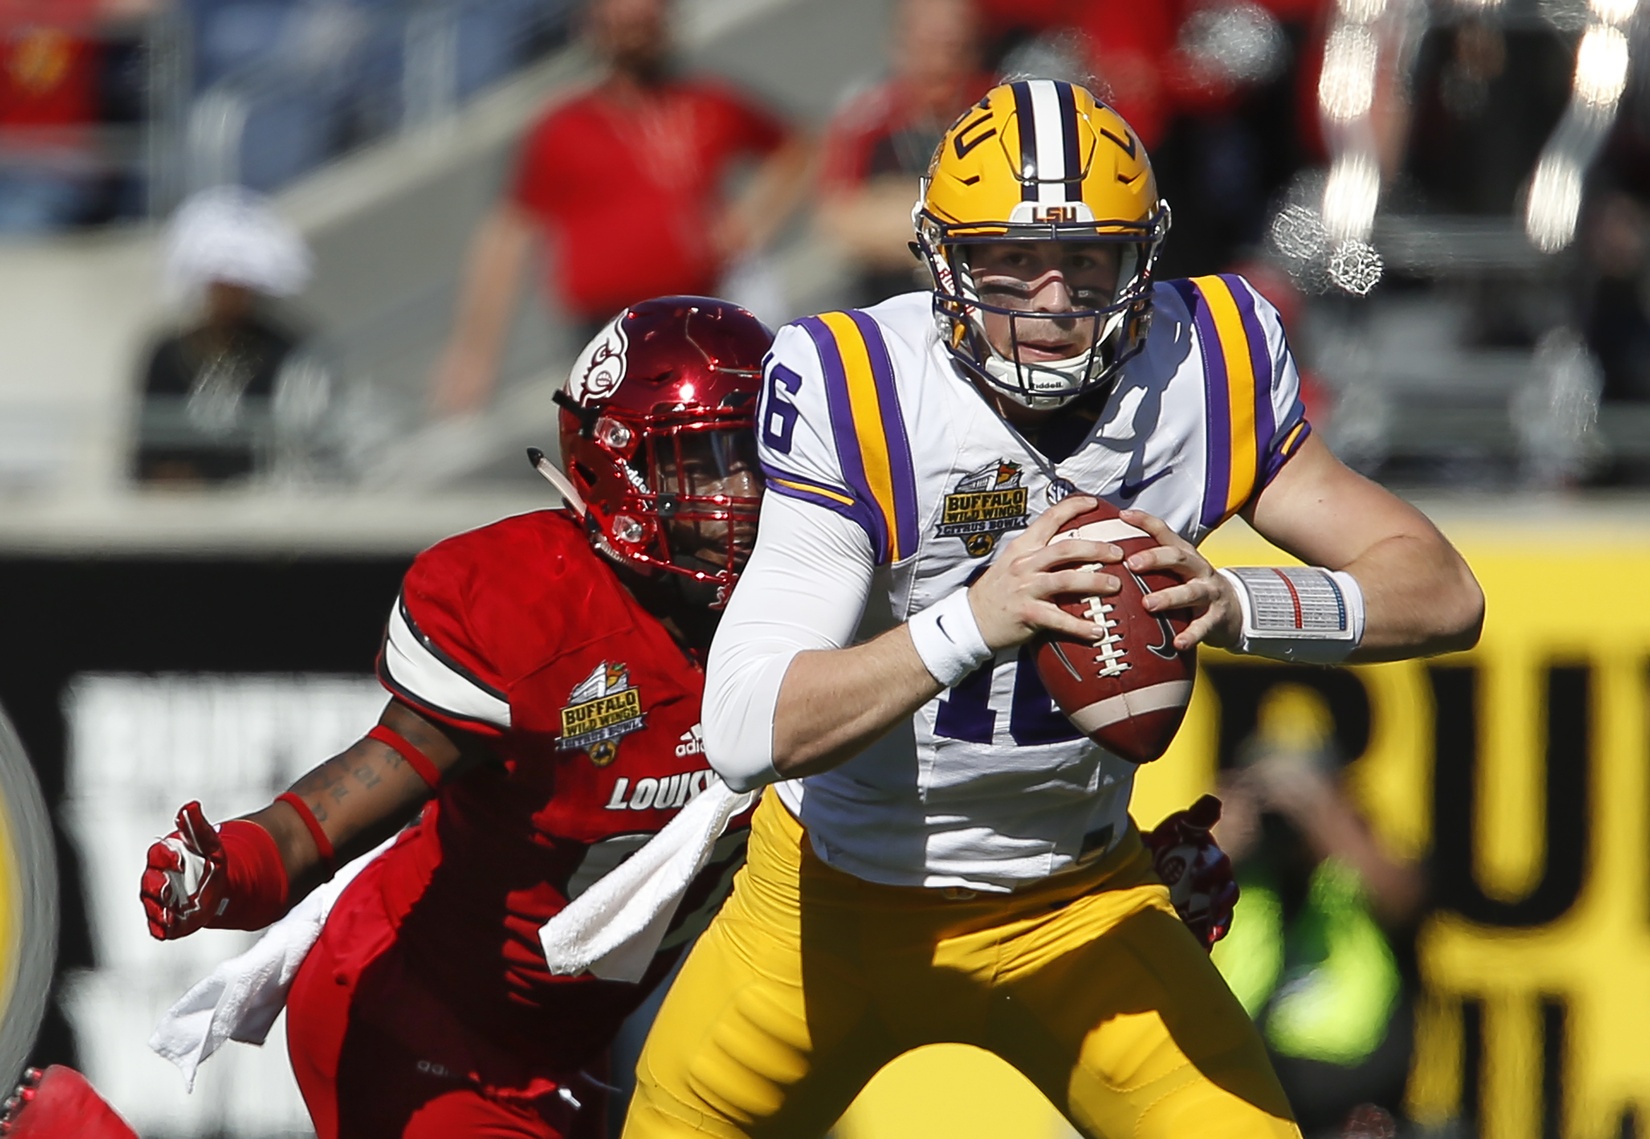 Dec 31, 2016; Orlando, FL, USA; LSU Tigers quarterback Danny Etling (16) is sacked by Louisville Cardinals linebacker Devonte Fields (92) during the first quarter of an NCAA football game in the Buffalo Wild Wings Citrus Bowl at Camping World Stadium. Mandatory Credit: Reinhold Matay-USA TODAY Sports